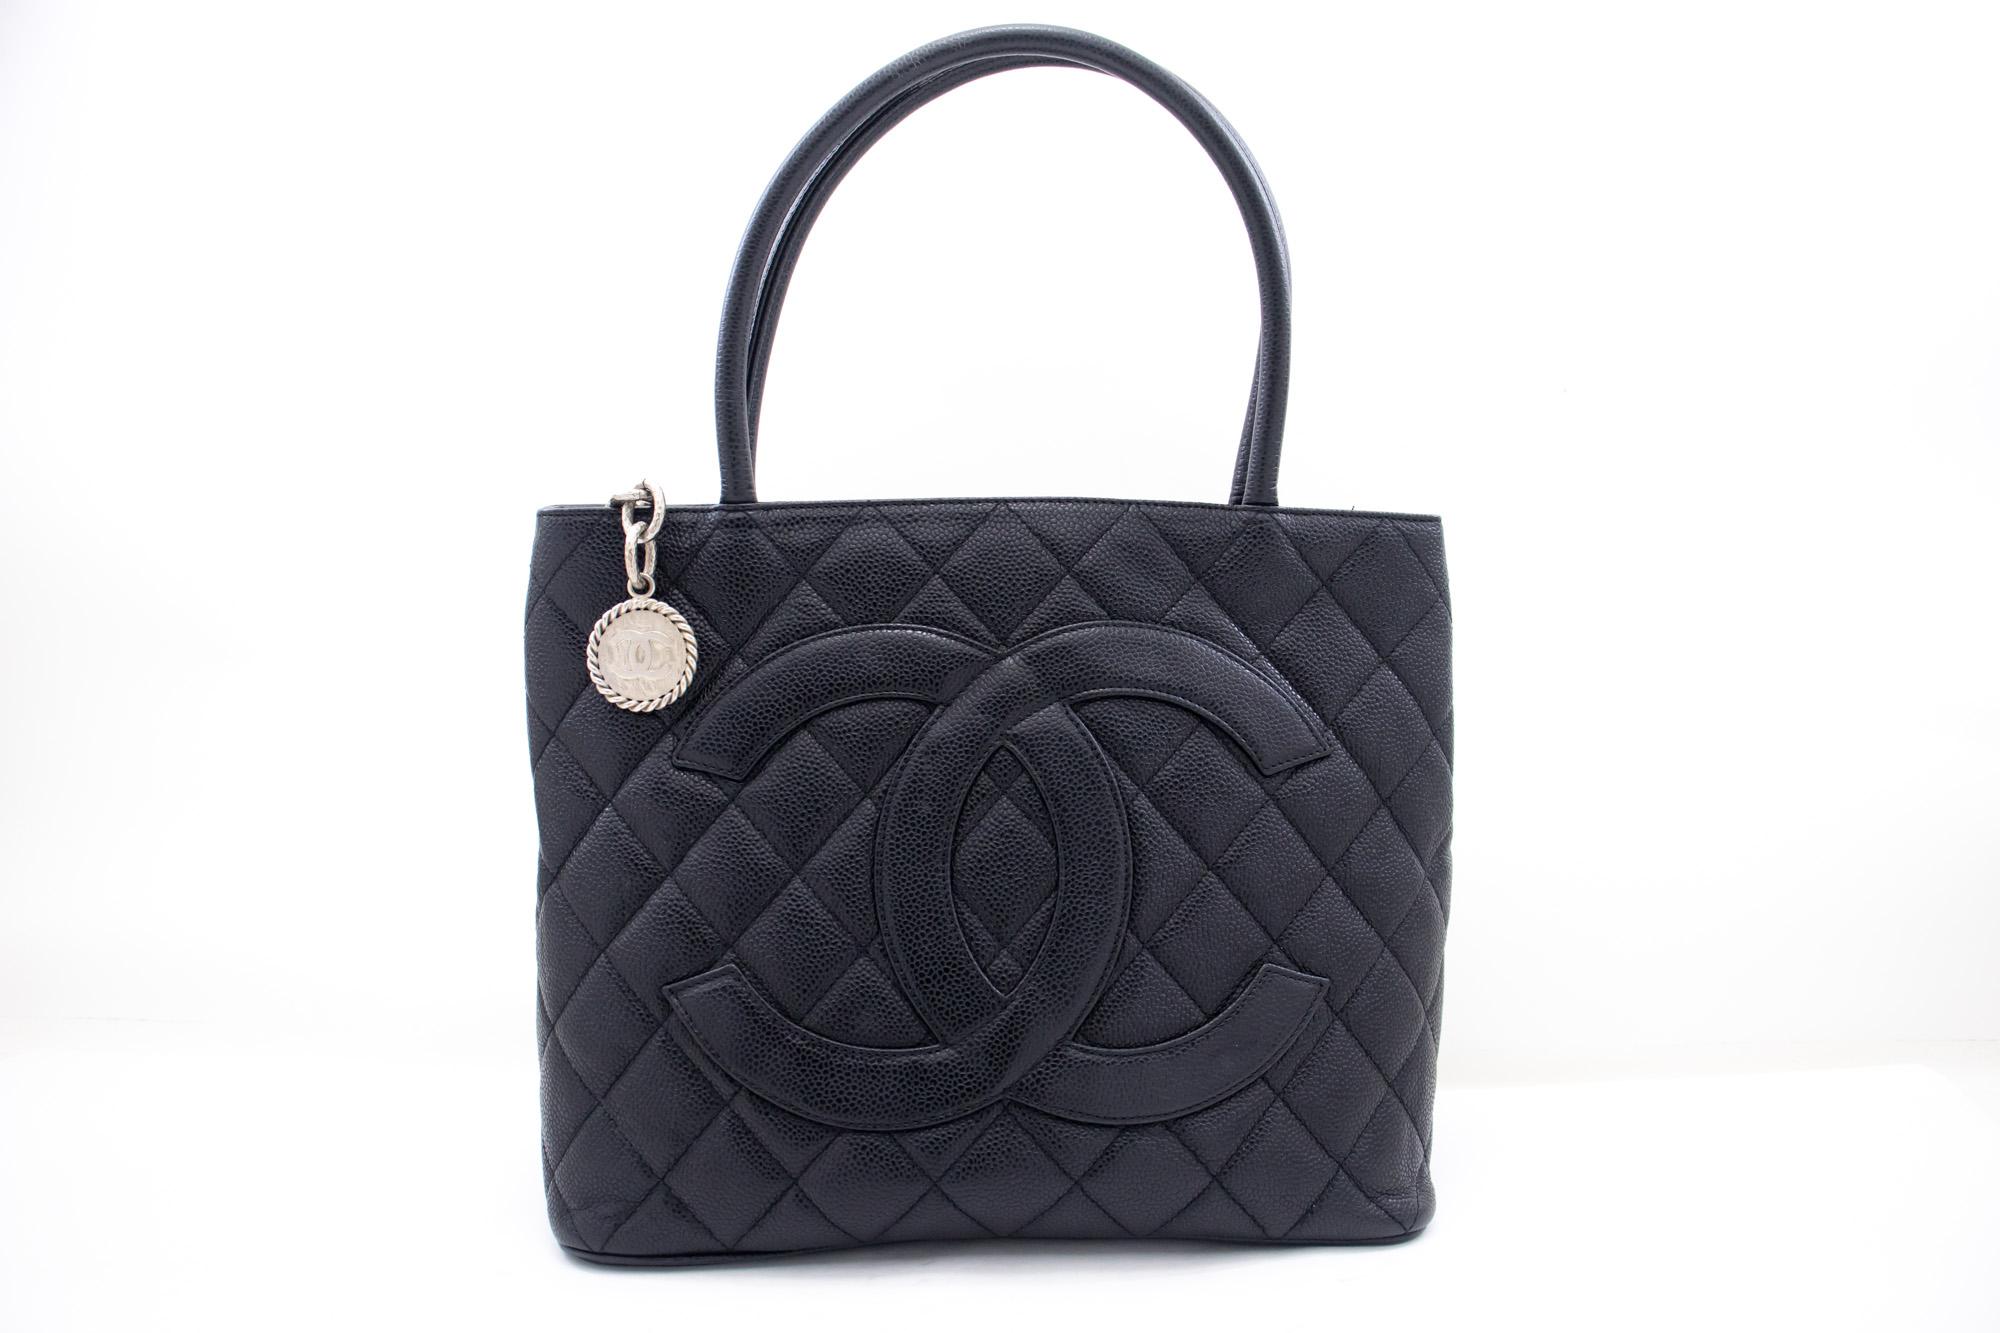 An authentic CHANEL Silver Medallion Caviar Shoulder Bag Shopping Tote Black. The color is Black. The outside material is Leather. The pattern is Solid. This item is Vintage / Classic. The year of manufacture would be 2000-2 0 0 2 .
Conditions &